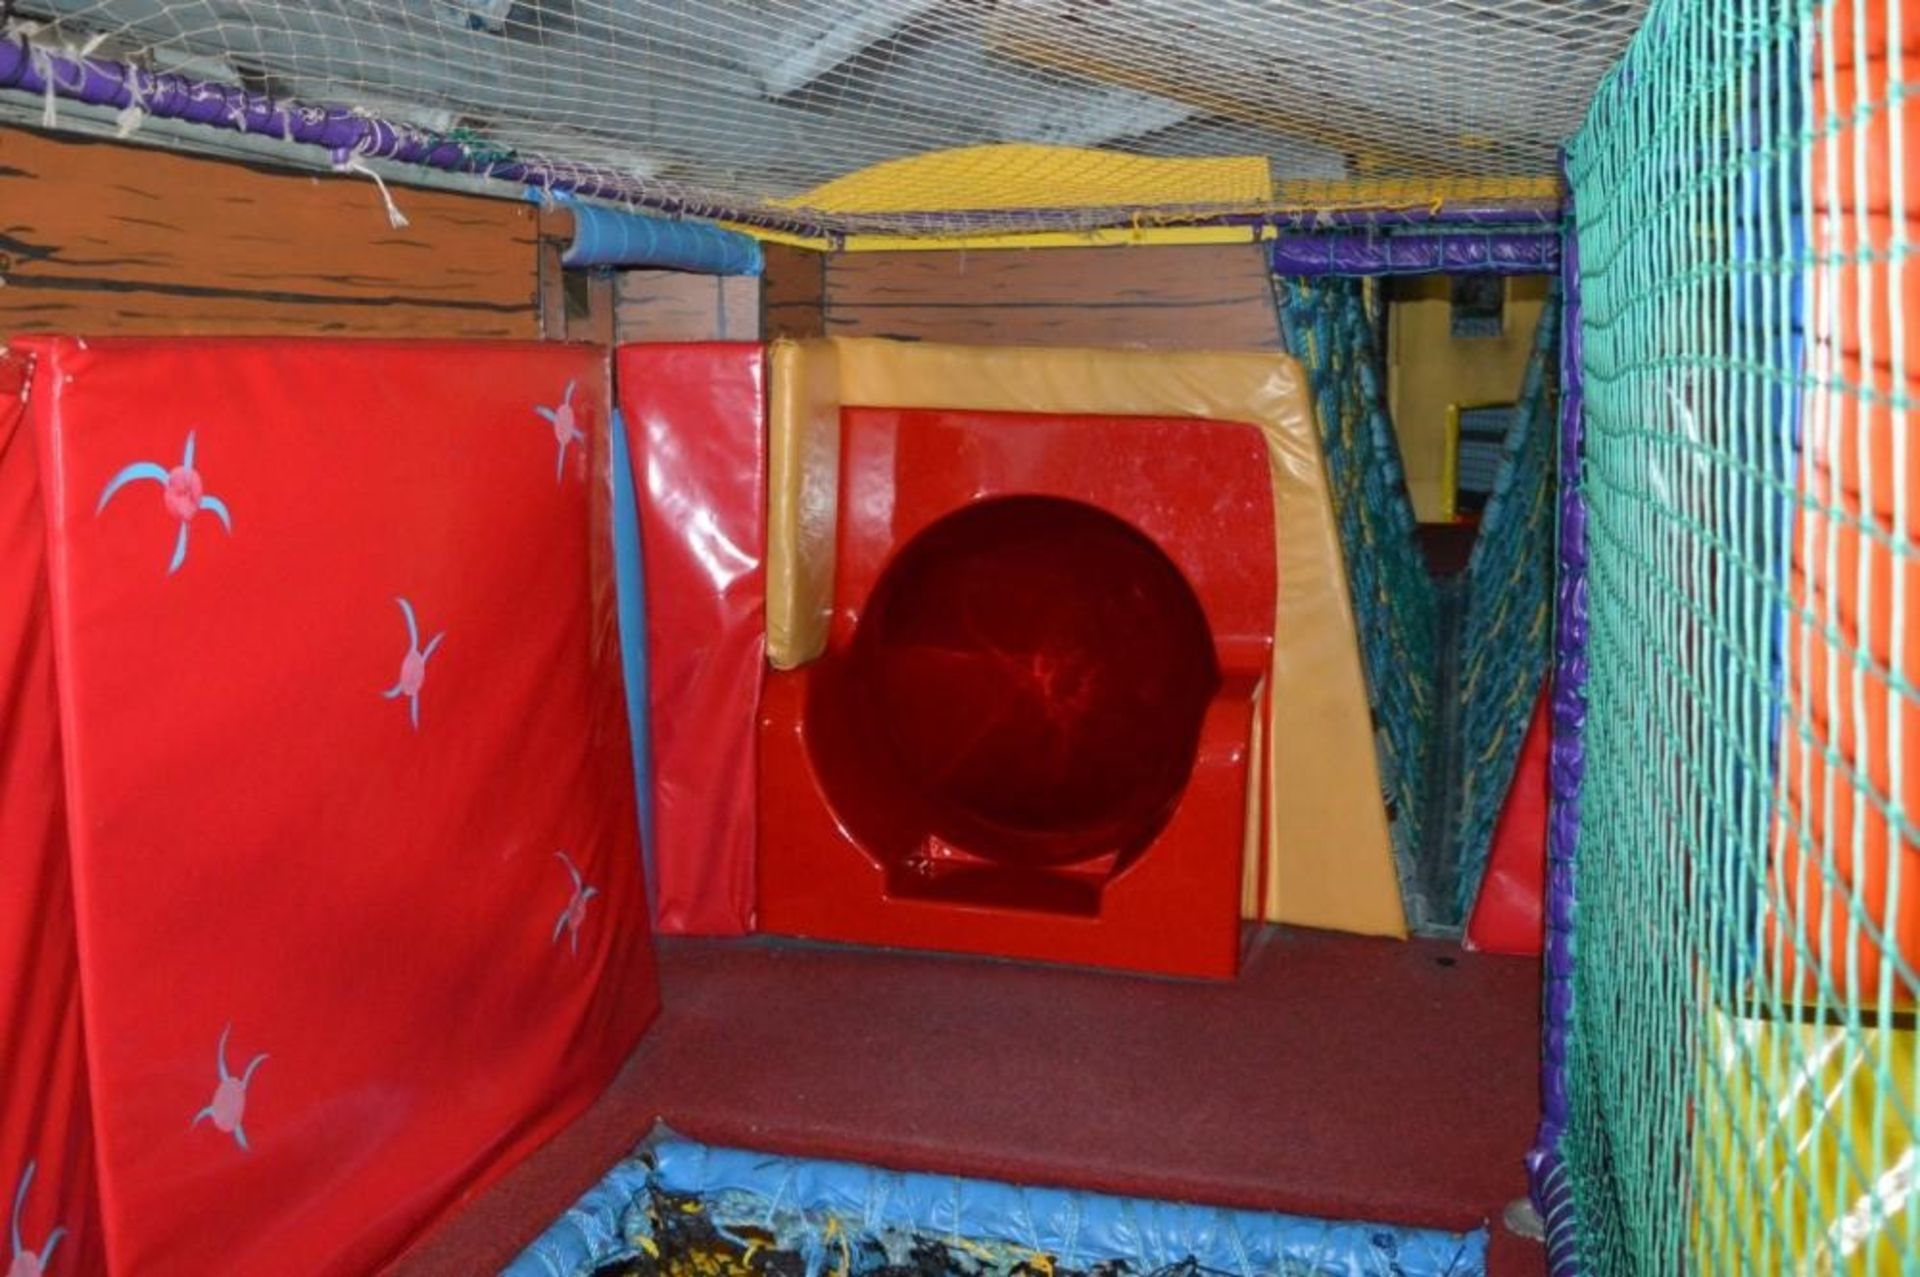 1 x Childrens Playcentre Tunnel Tube Slide in Red - Very Good Condition - Ref PTP - CL351 - - Image 2 of 8